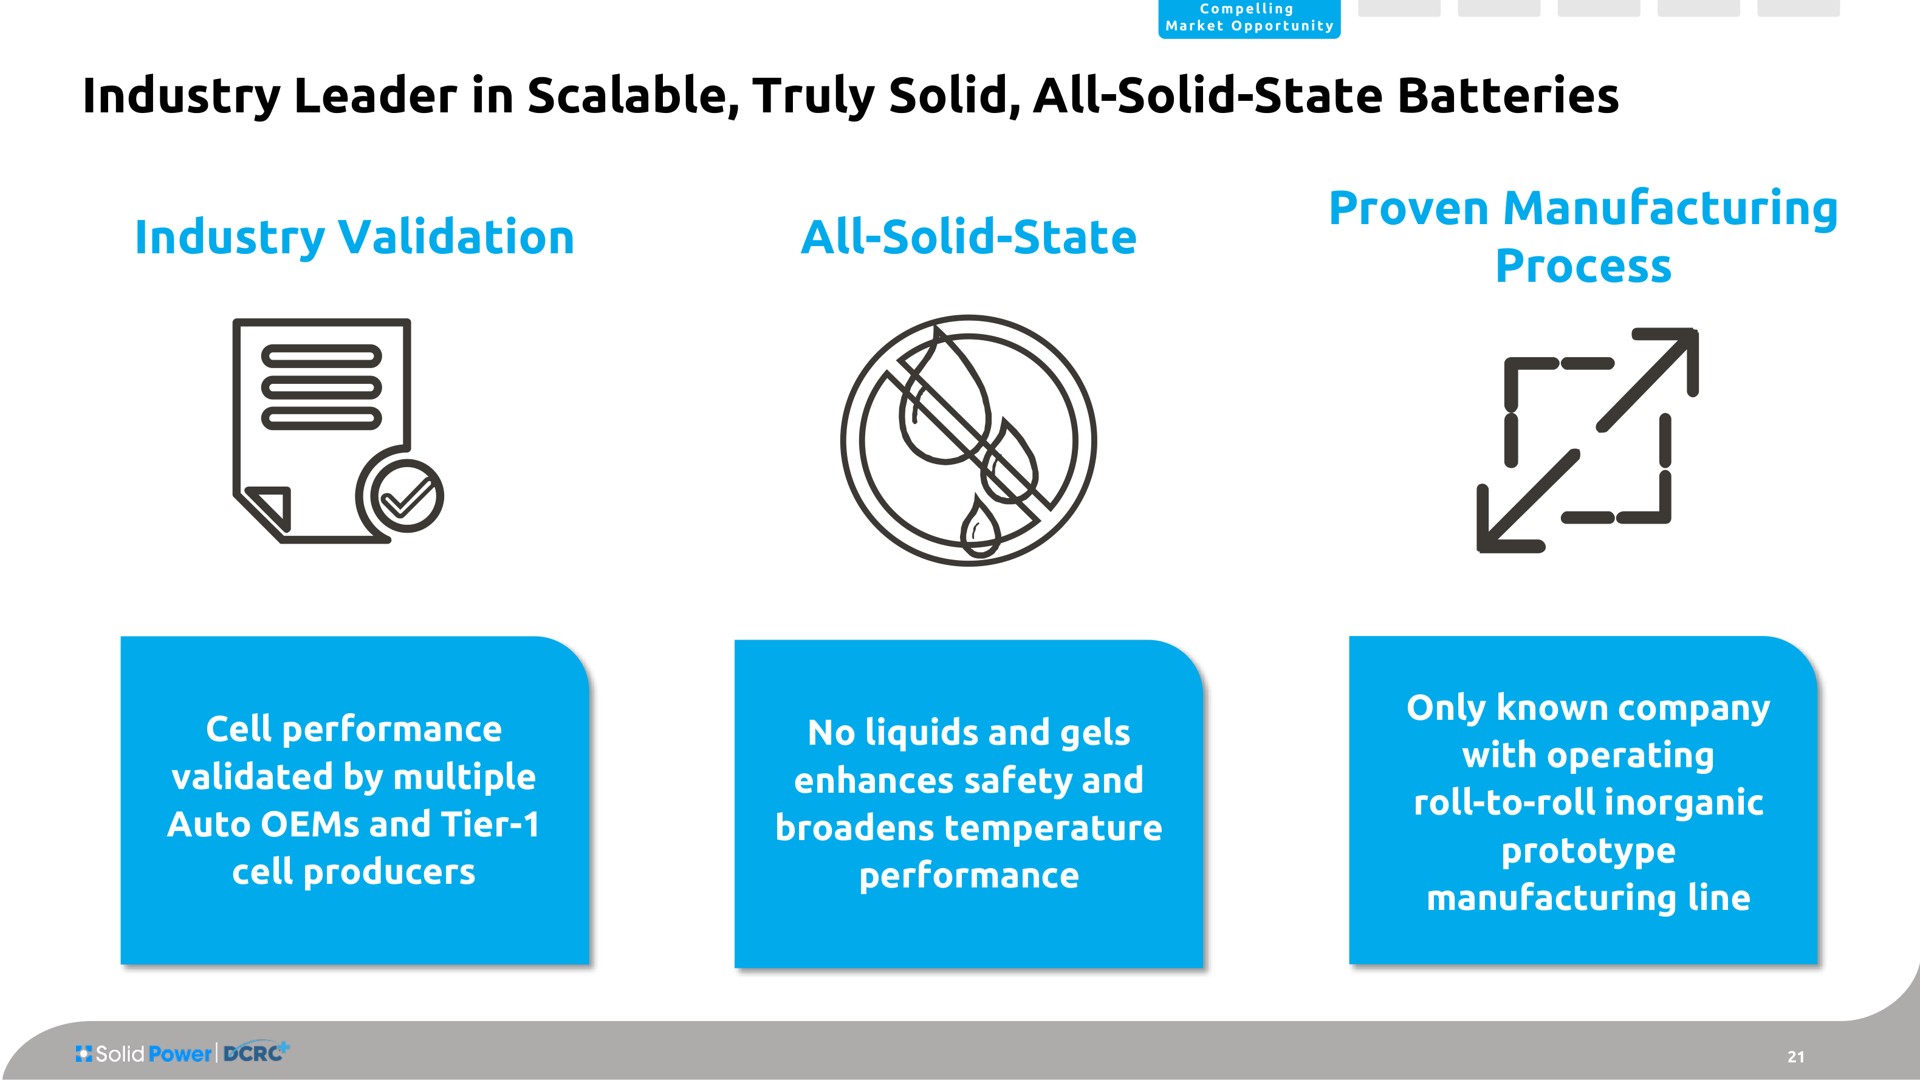 industry leader in scalable truly solid all solid state batteries industry validation all solid state proven manufacturing process cell performance validated by multiple auto and tier cell producers no liquids and gels enhances safety and broadens temperature performance only known company with operating roll to roll inorganic prototype manufacturing line | Solid Power